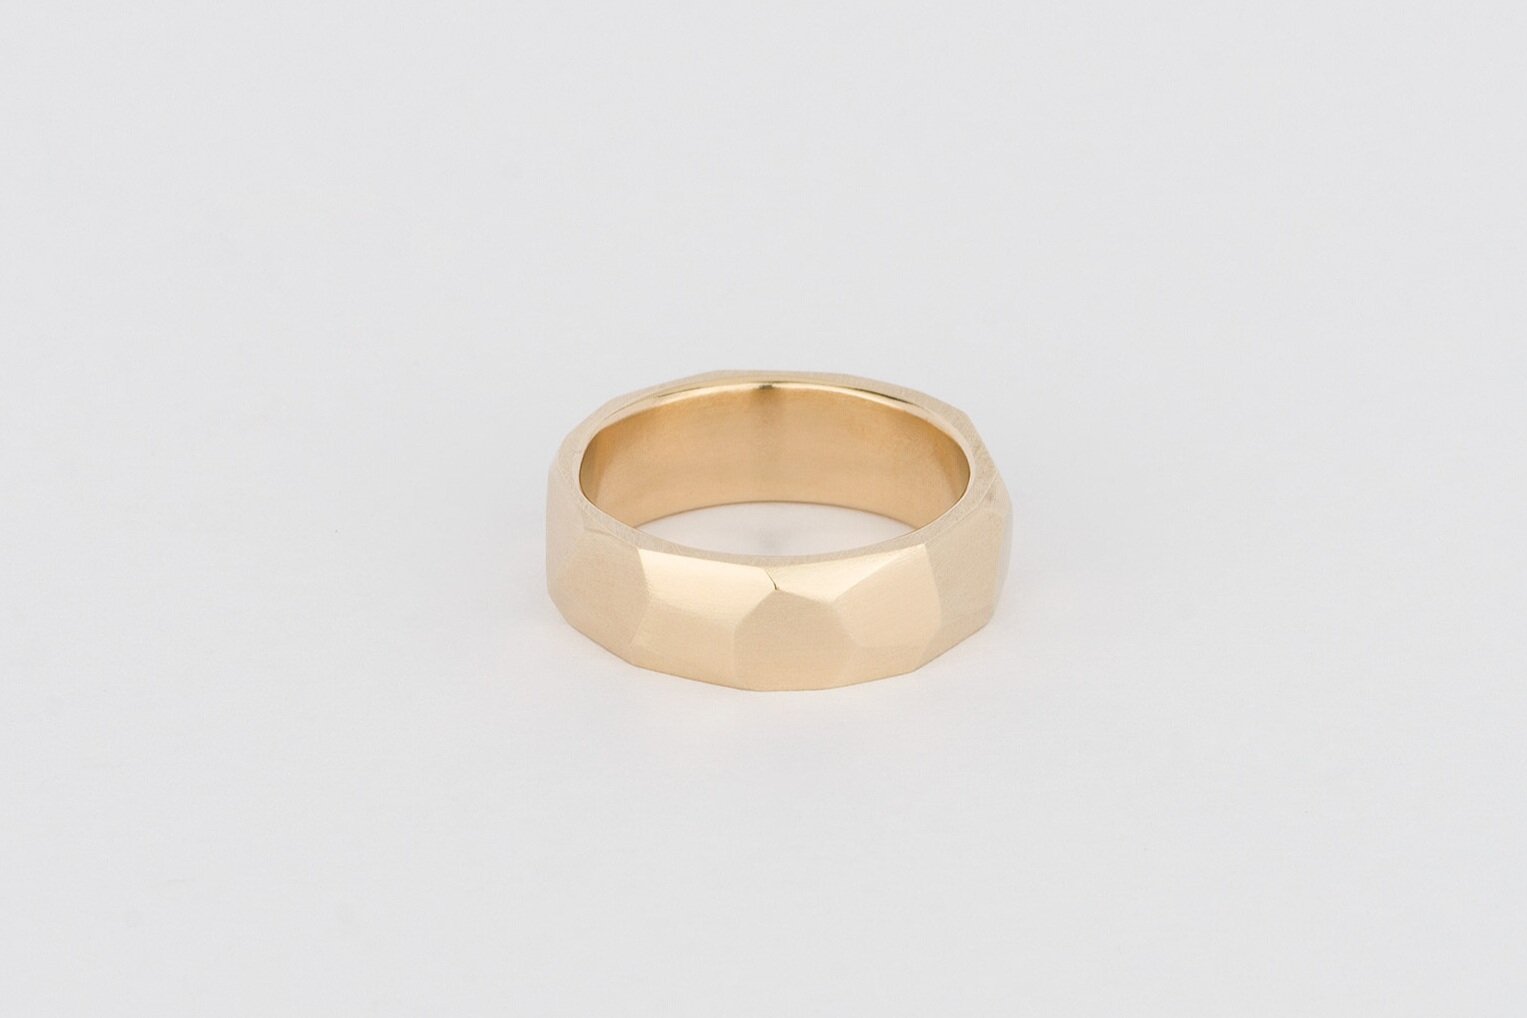  Fairtrade 9ct yellow gold broad Geo Ring with a polished finish 